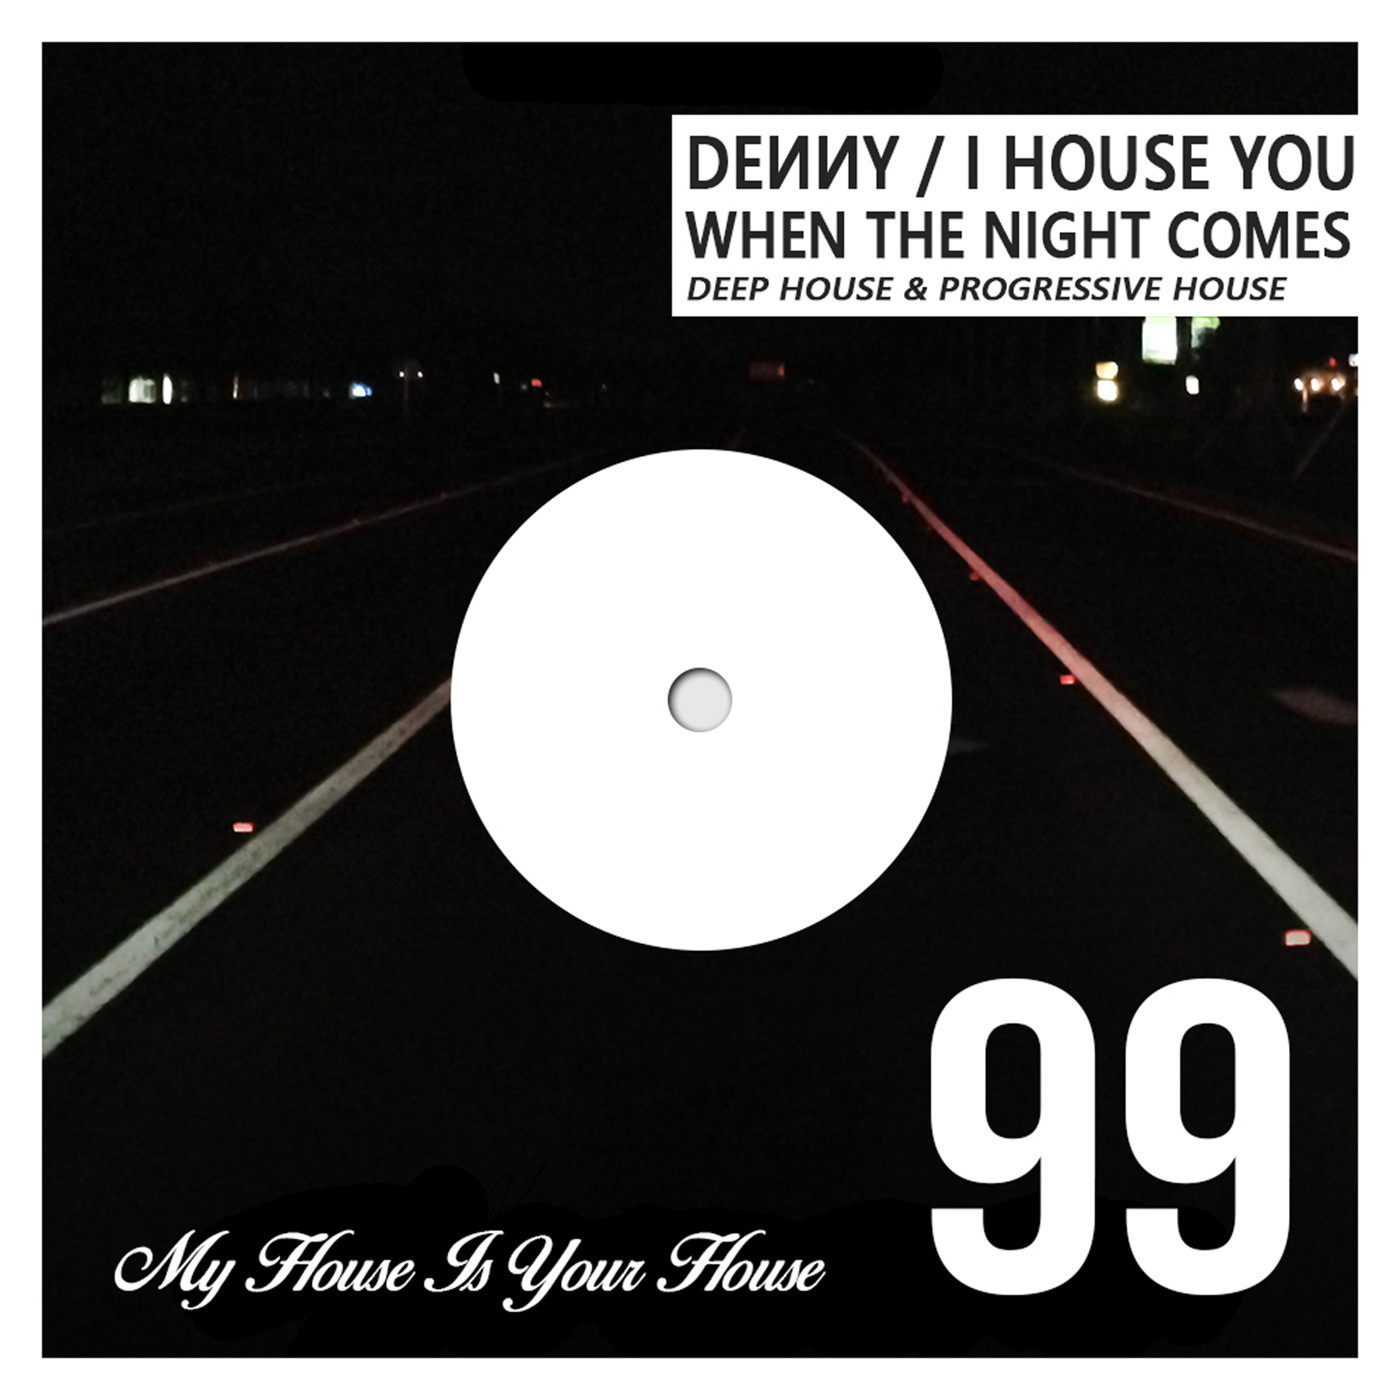 Denny - I House You 99 - When The Night Comes (Deep  Progressive House) –  I House You – Lyssna här – Podtail